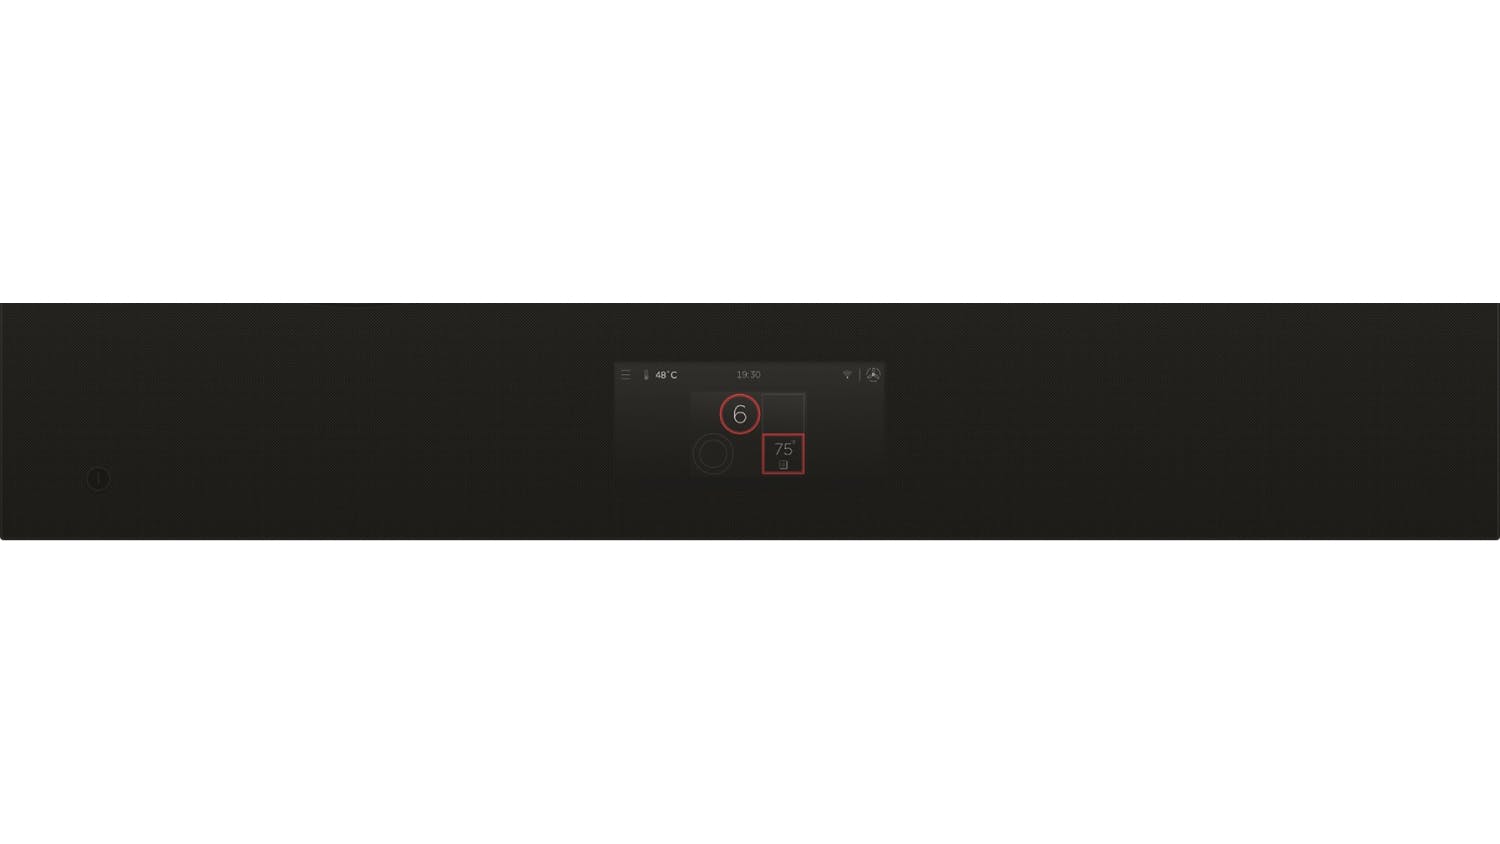 Fisher & Paykel 76cm Primary Modular 4 Zone Induction Cooktop - Black (Series 9/CI764DTTB1)